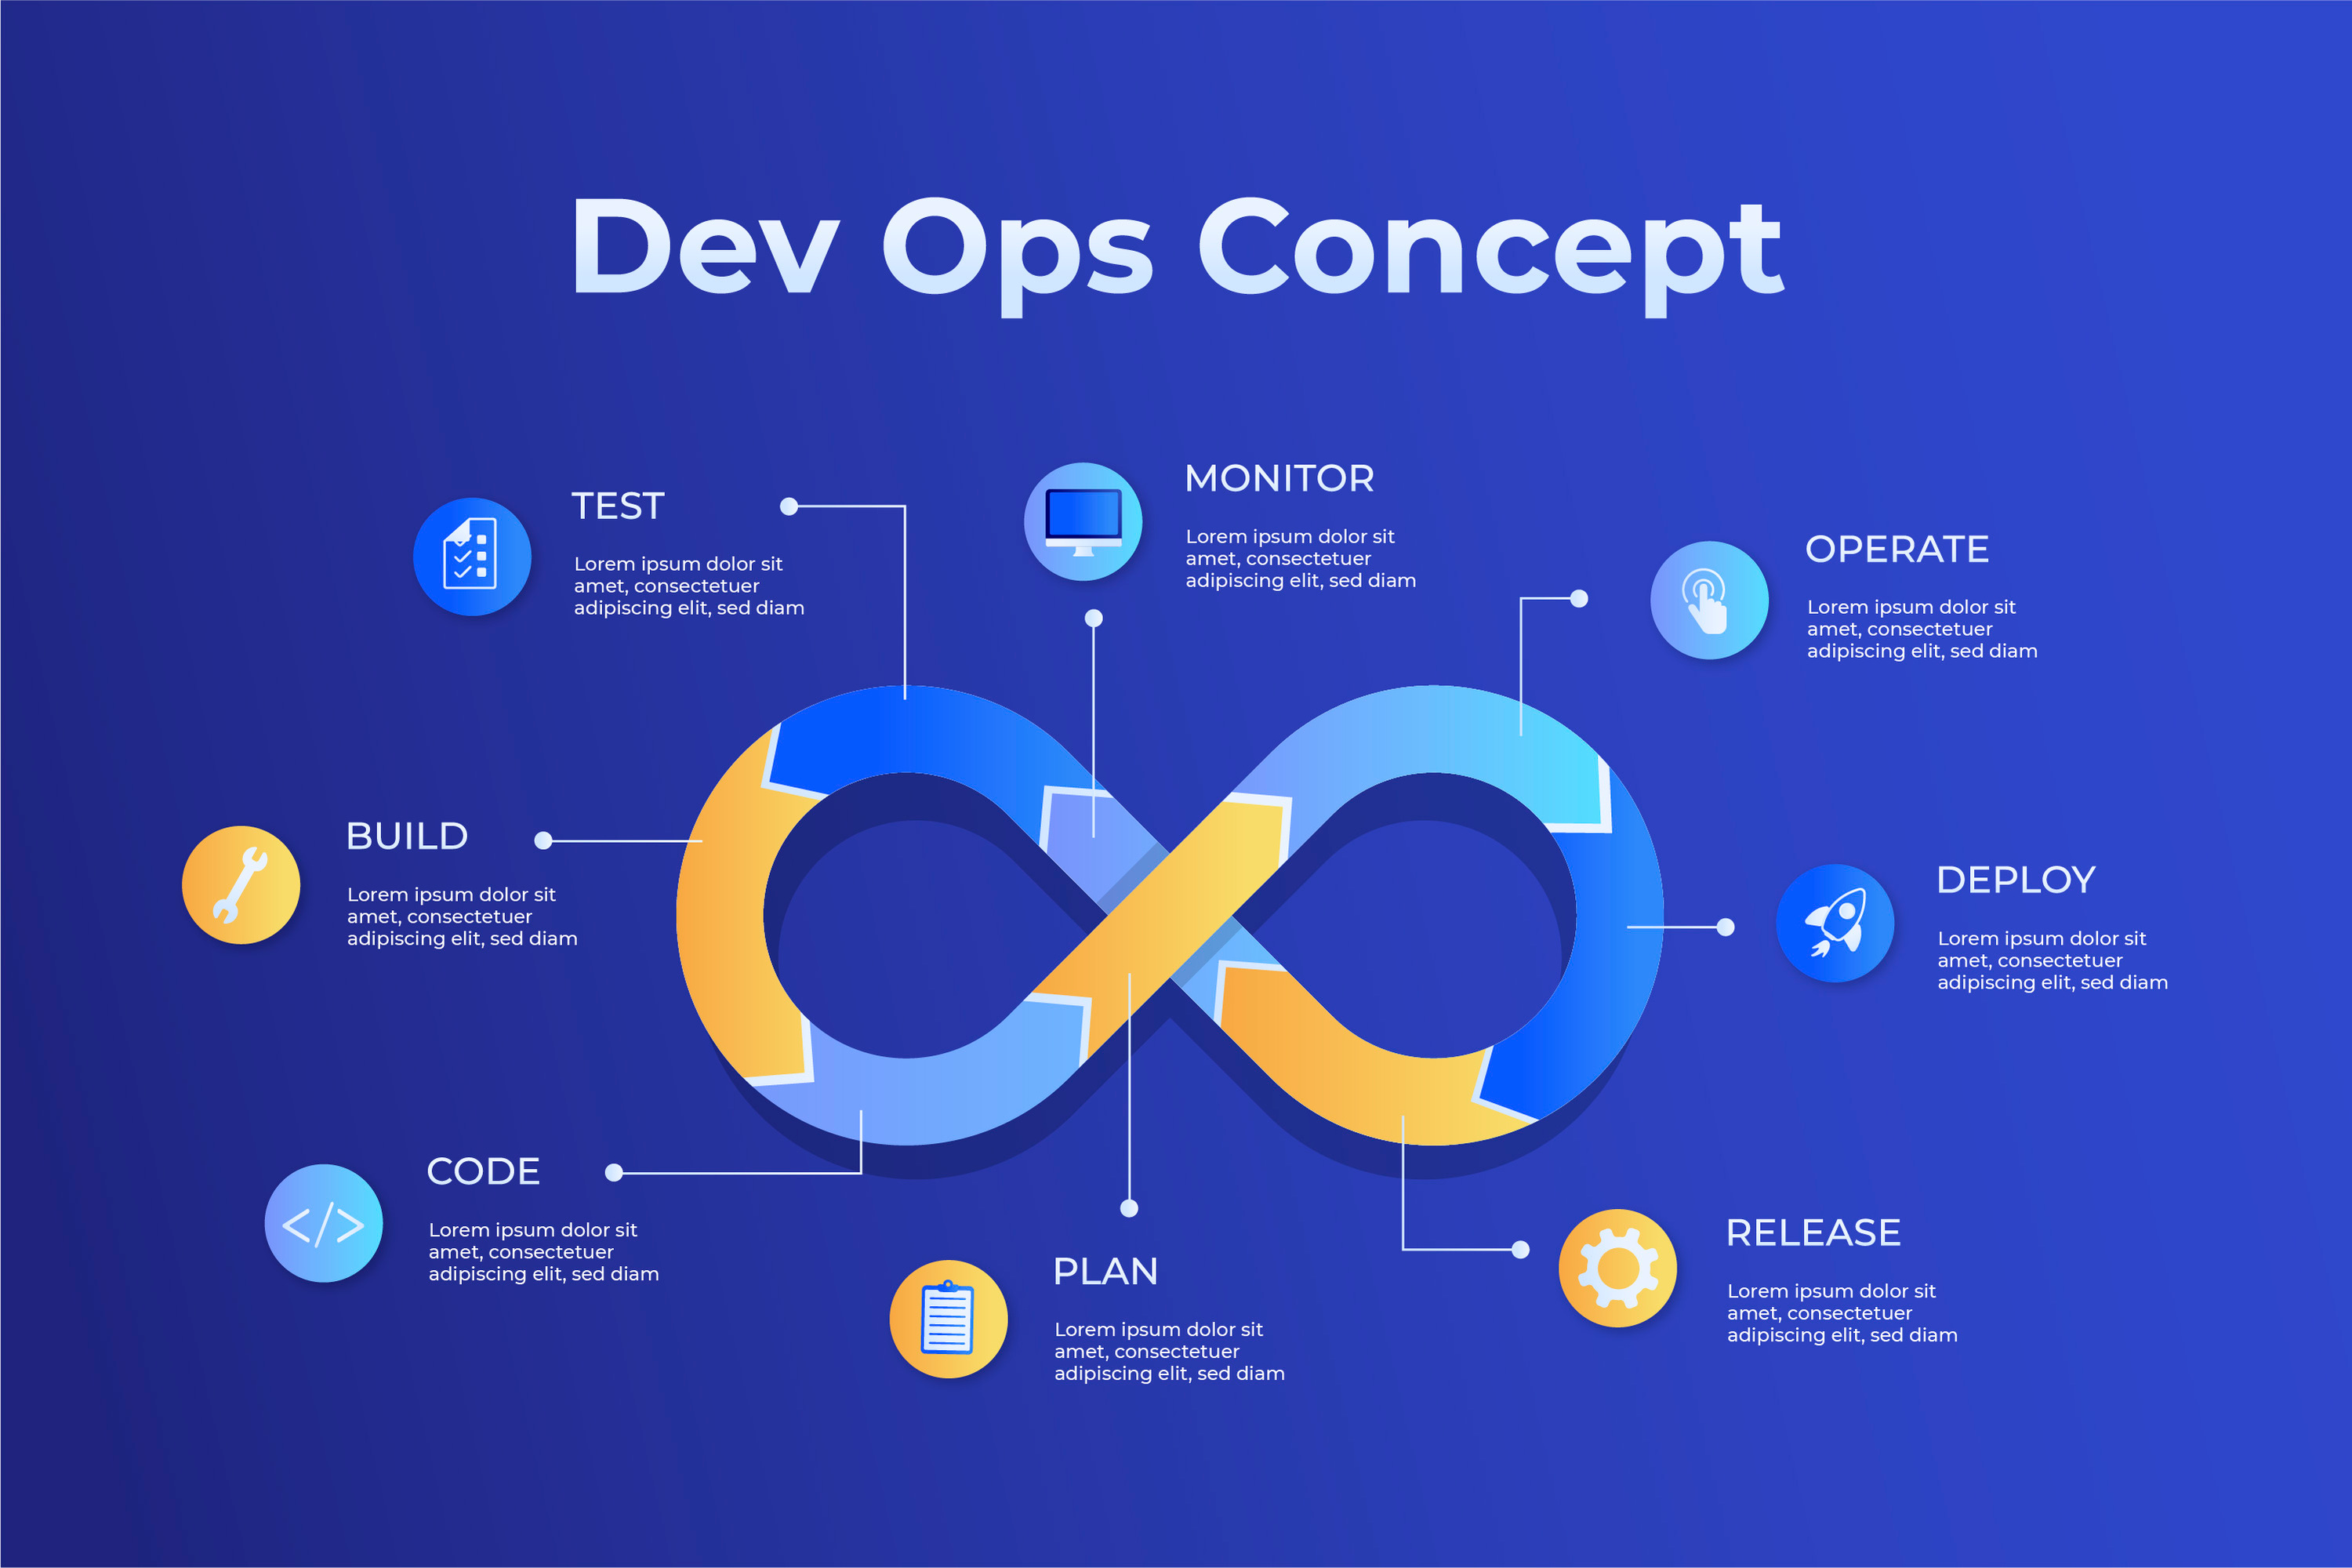 The image depicts the DevOps concept